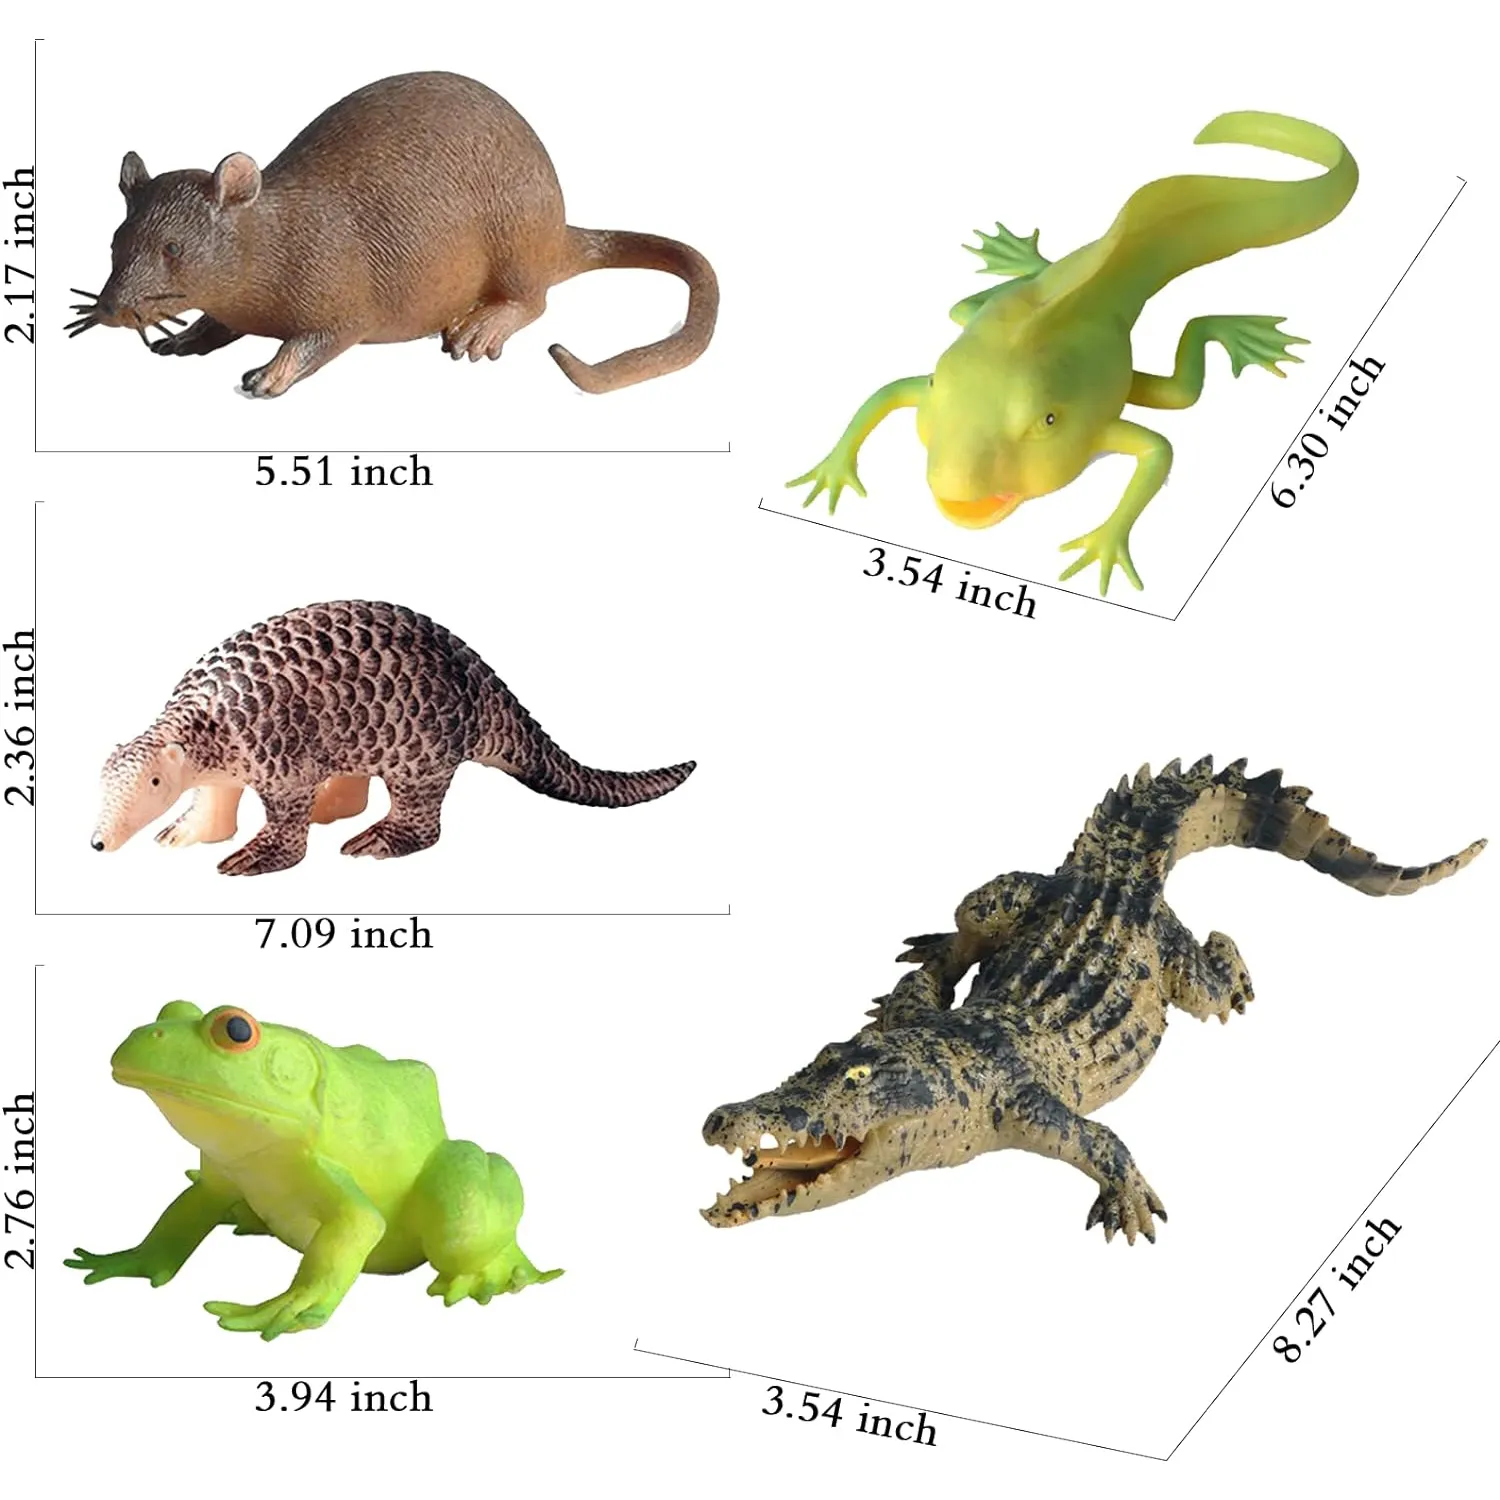 TPR Super Stretch Plastic Animal Toys Set For Kids Soft Rubber Squishy  Figures With Frog Tadpole, Crocodile Rat, Pangolin Fun Decompression Stress  Relief Game From Sxe_toys, $11.39